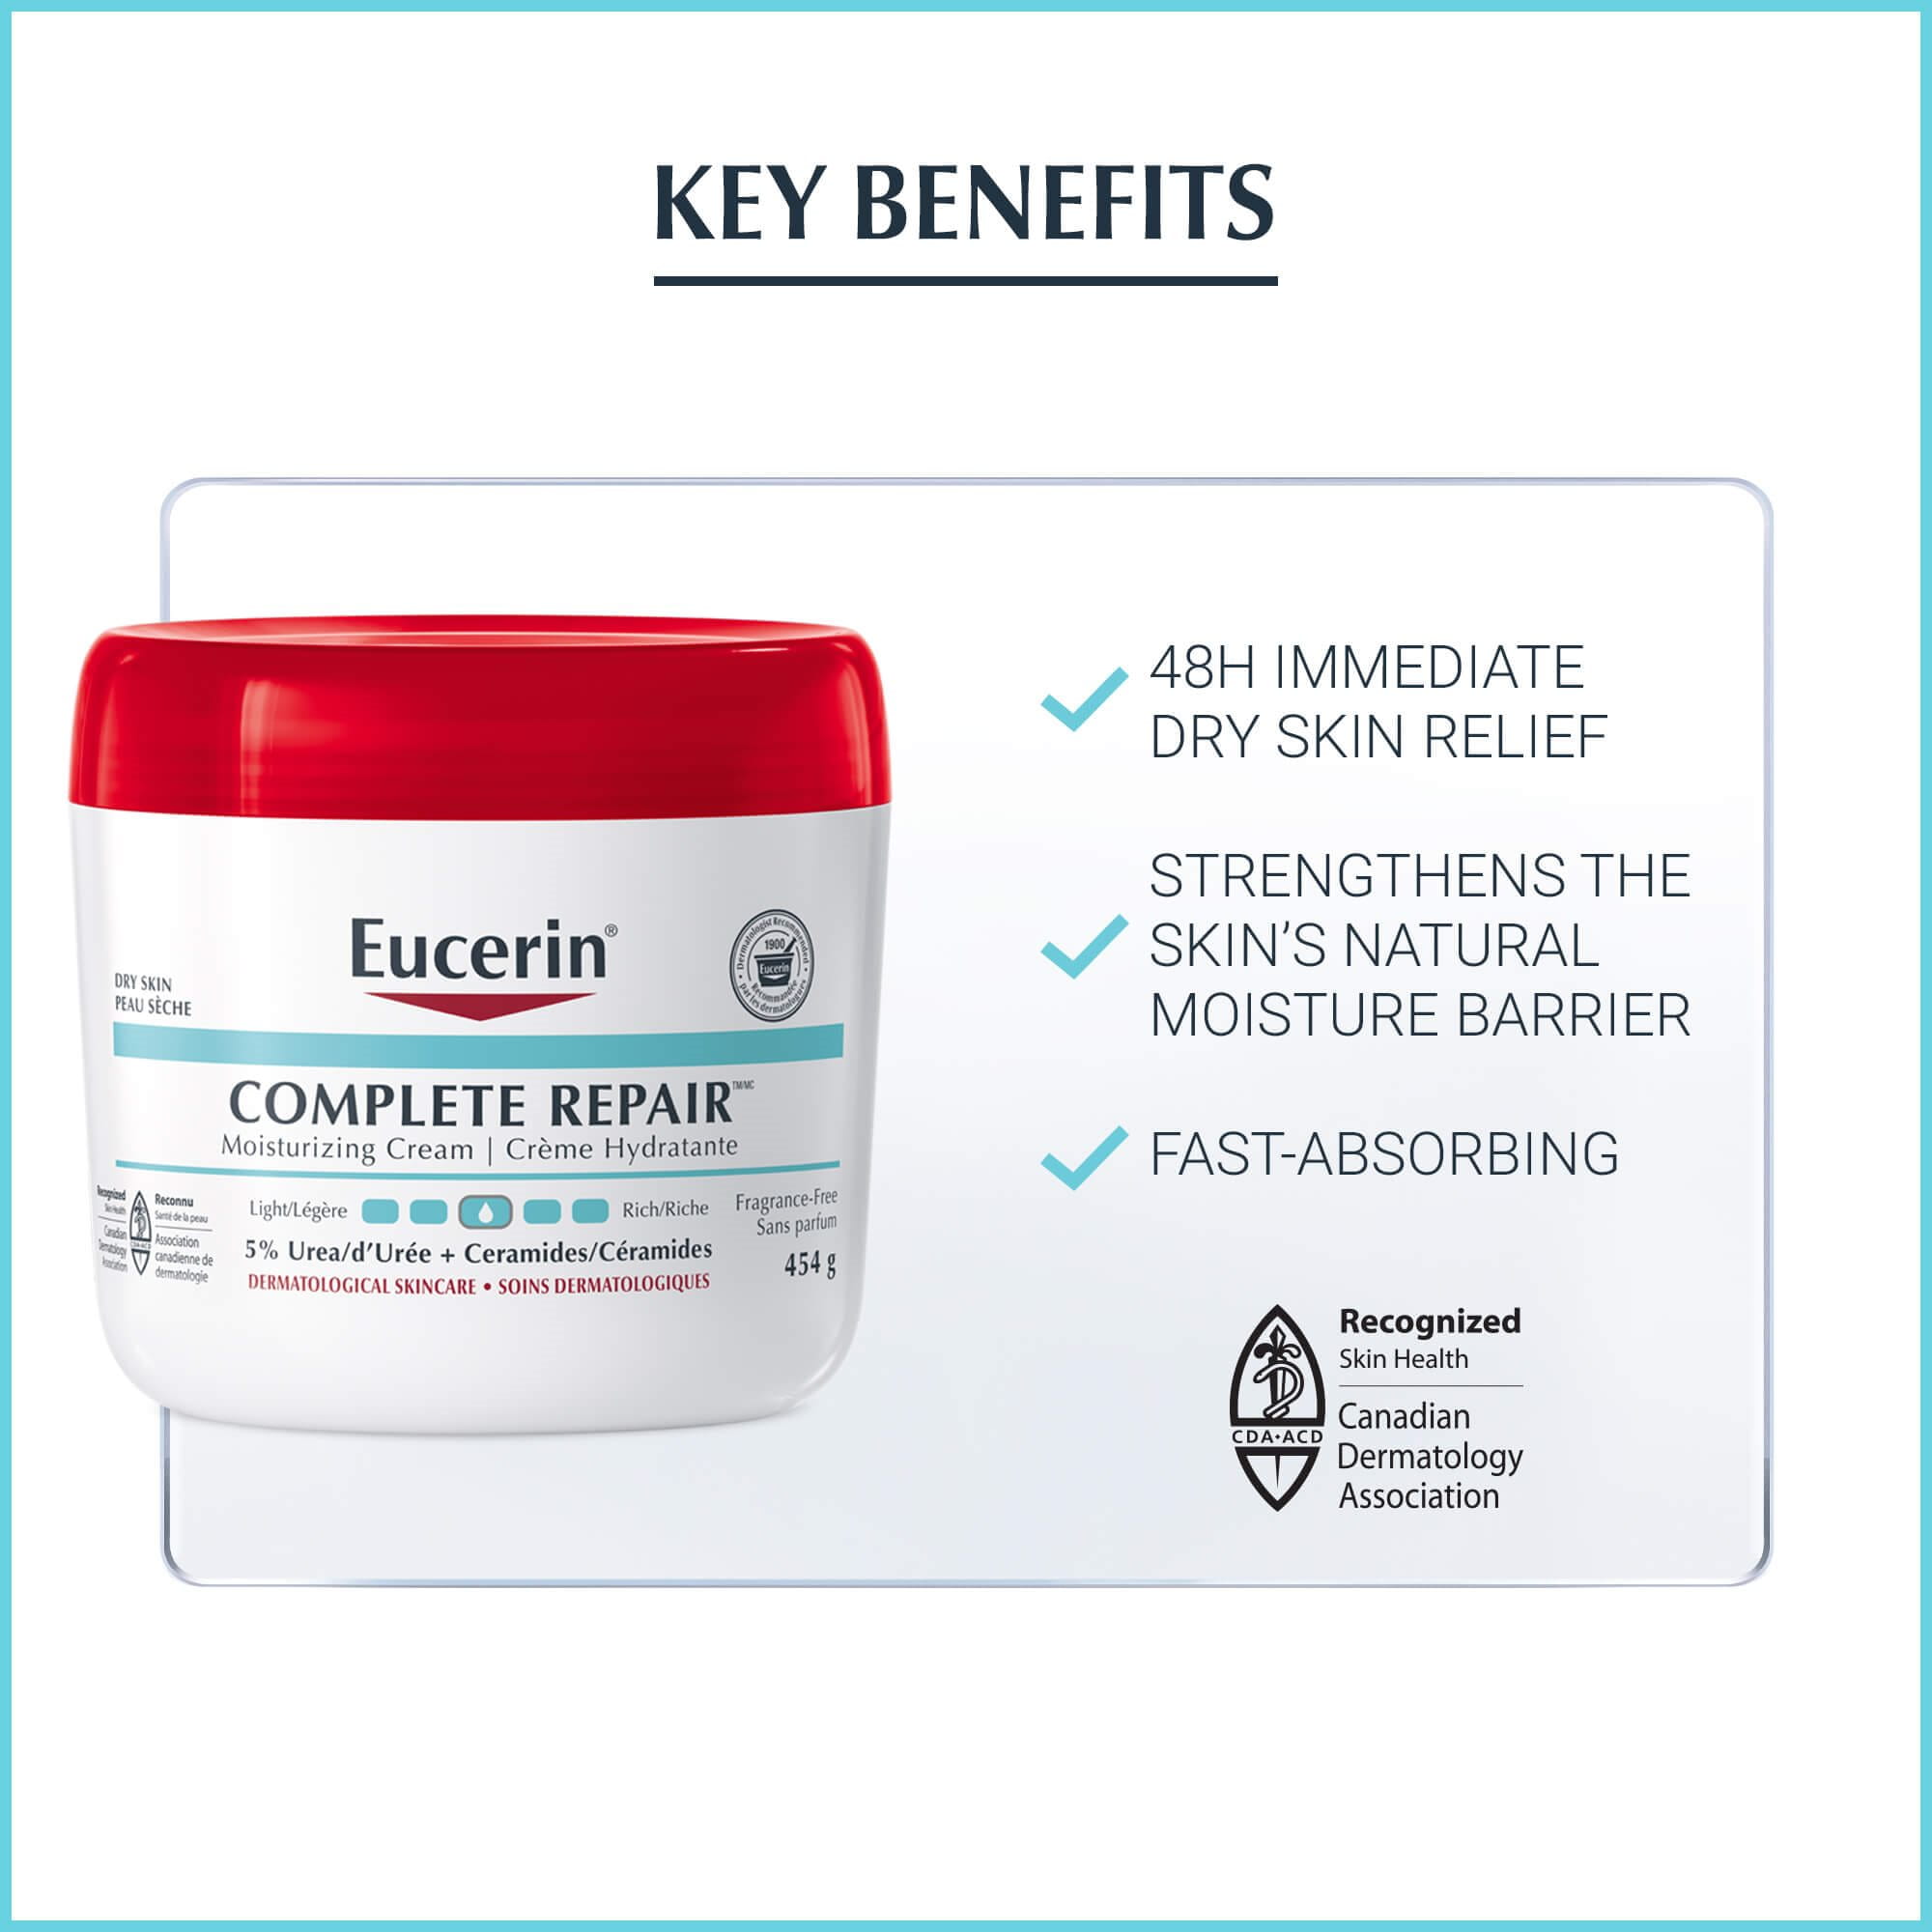 Image listing the key benefits of using Eucerin Complete Repair Cream.